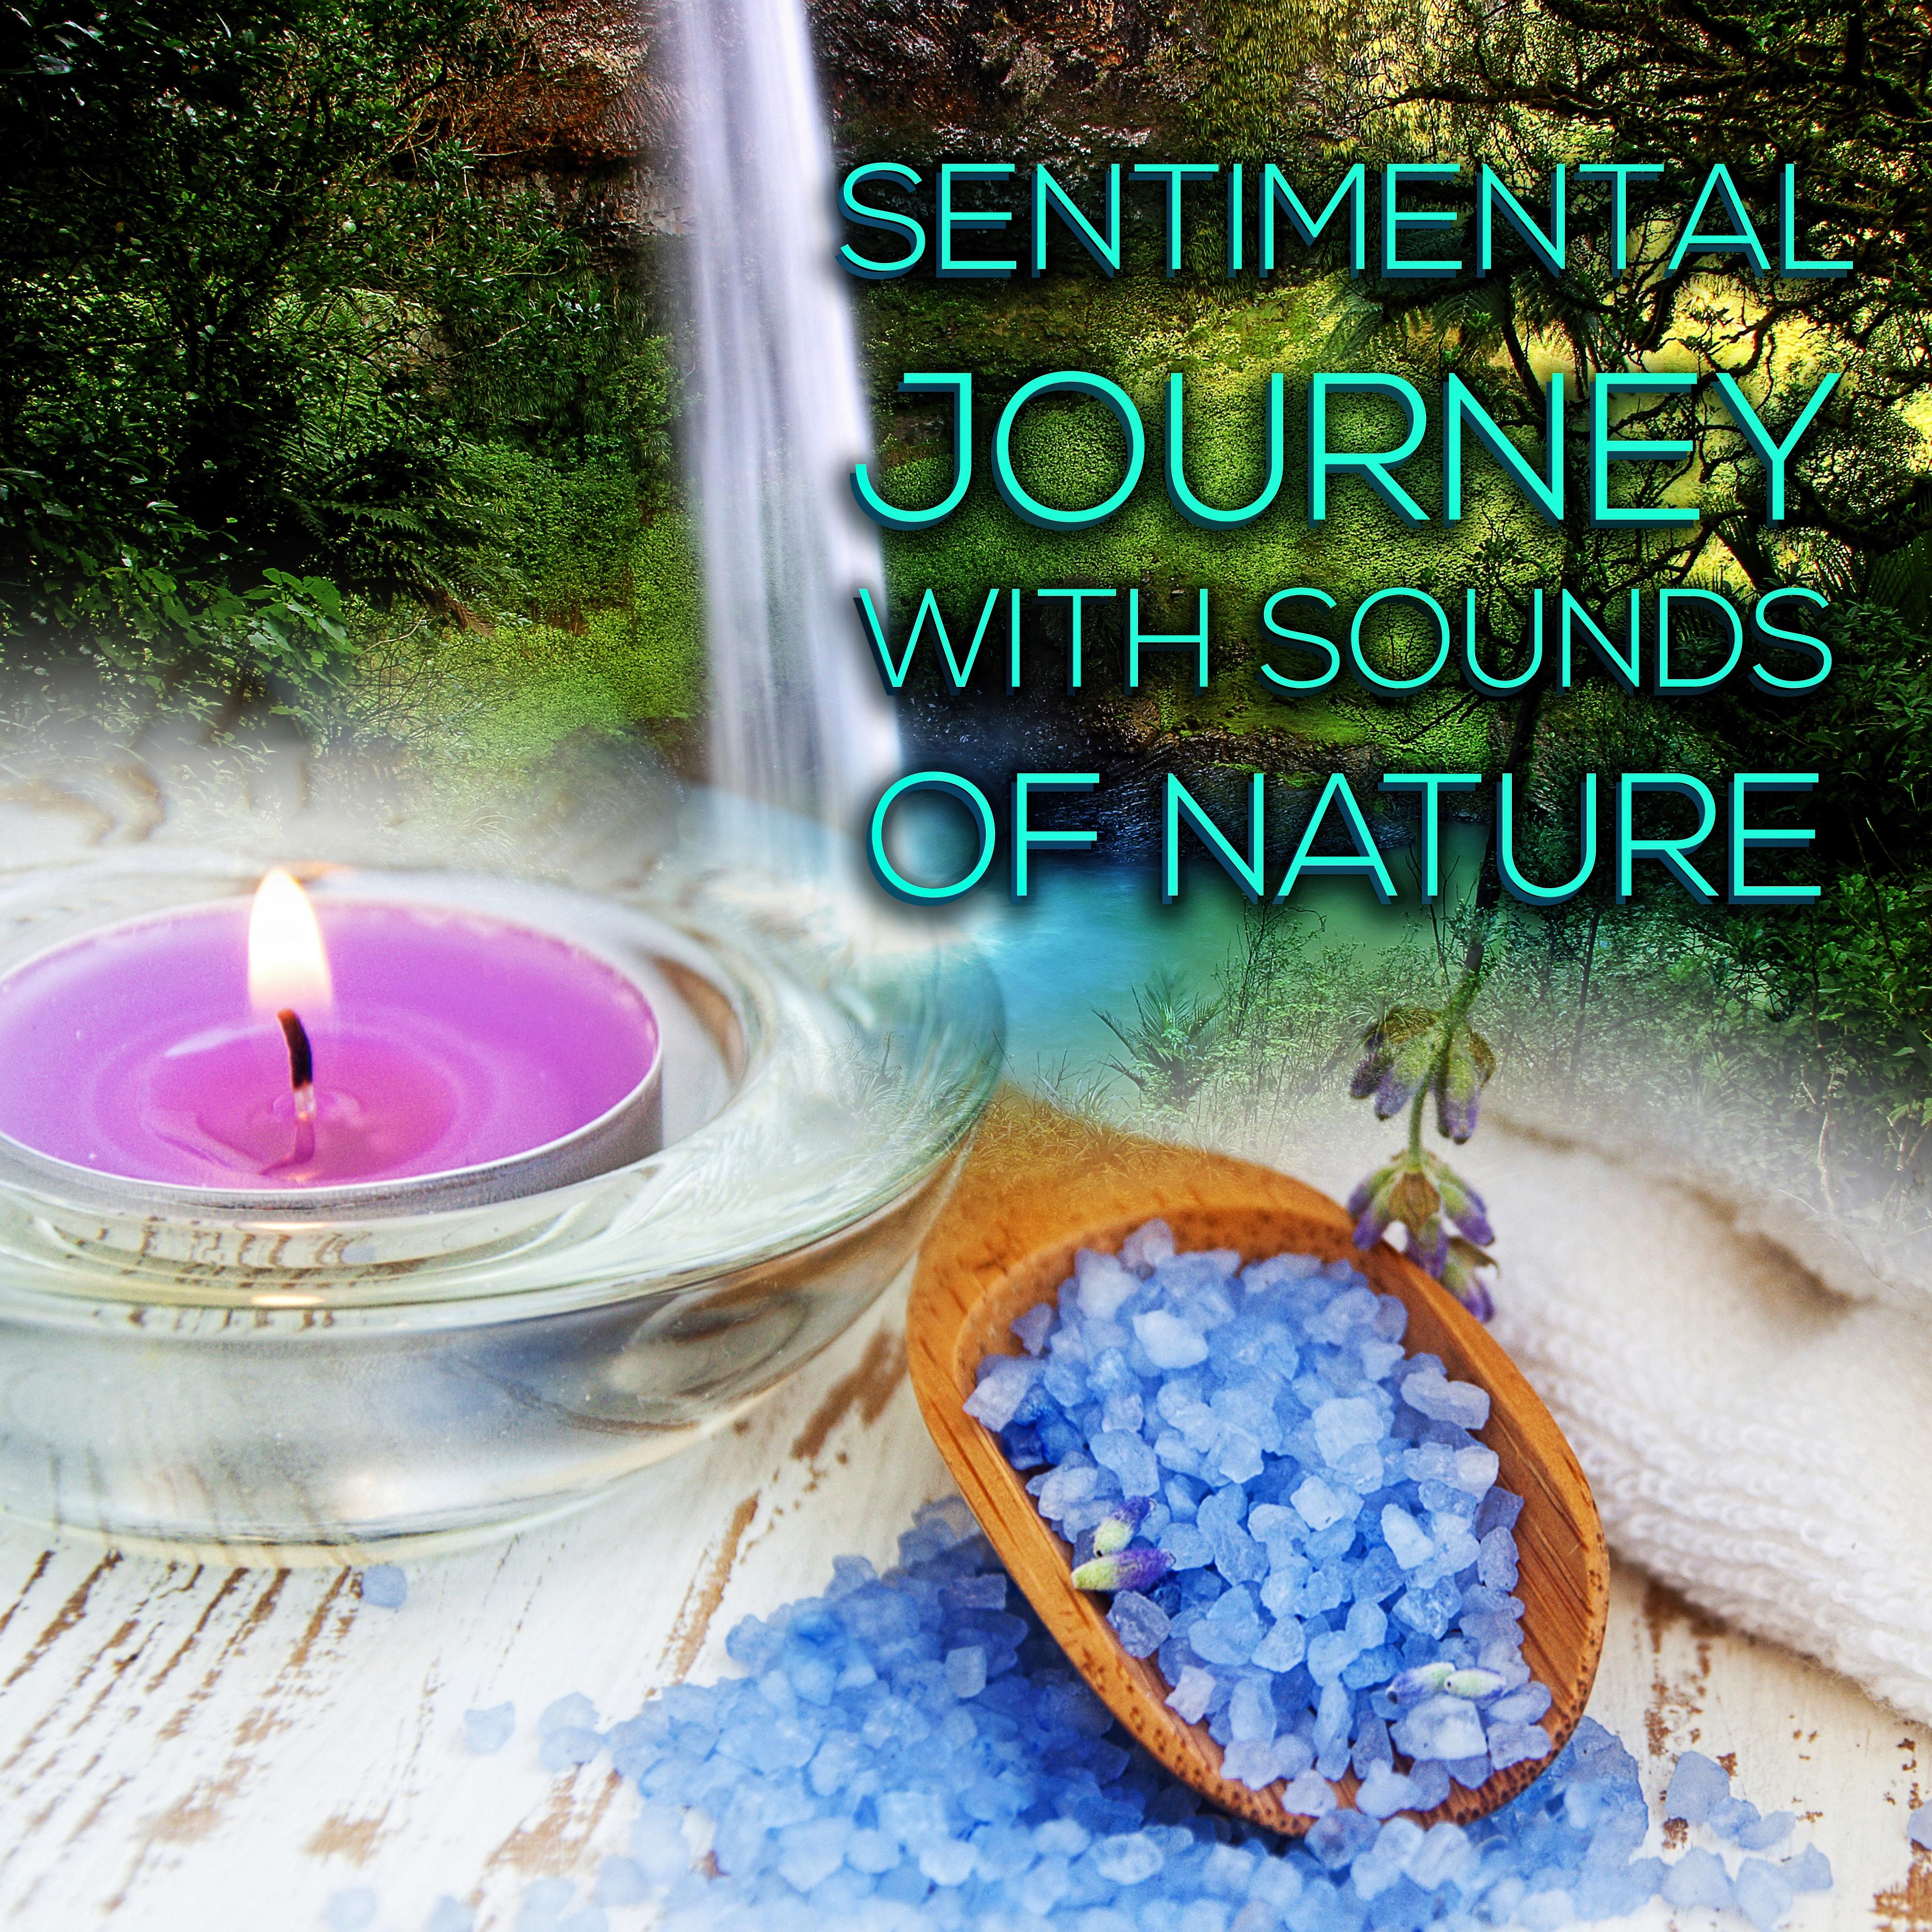 Sentimental Journey with Sounds of Nature - Sound Therapy Music for Relaxation, Meditation with Sounds of Nature, Music for Healing Through Sound and Touch, Music for Yoga & Massage